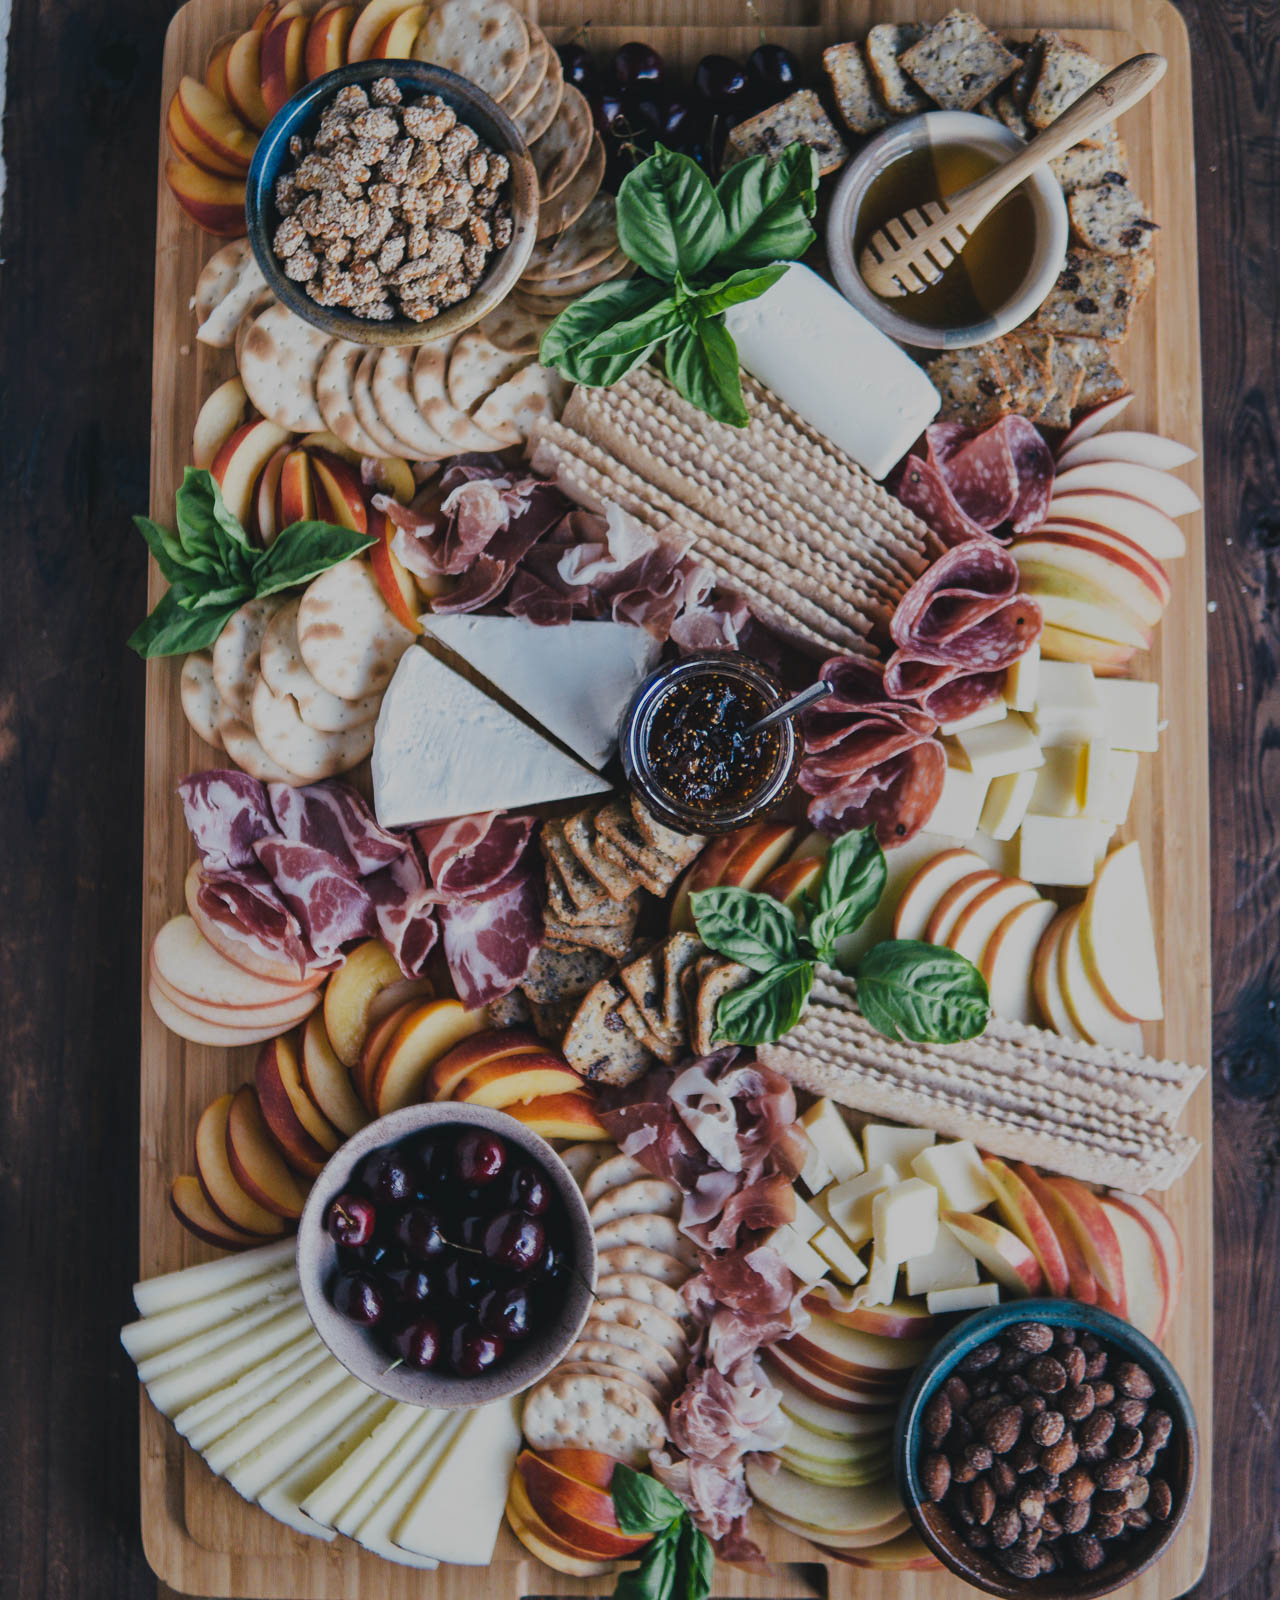 A beautiful Summer Charcuterie Board Spread on a wooden cutting board for this year's Labor Day Weekend Menu.